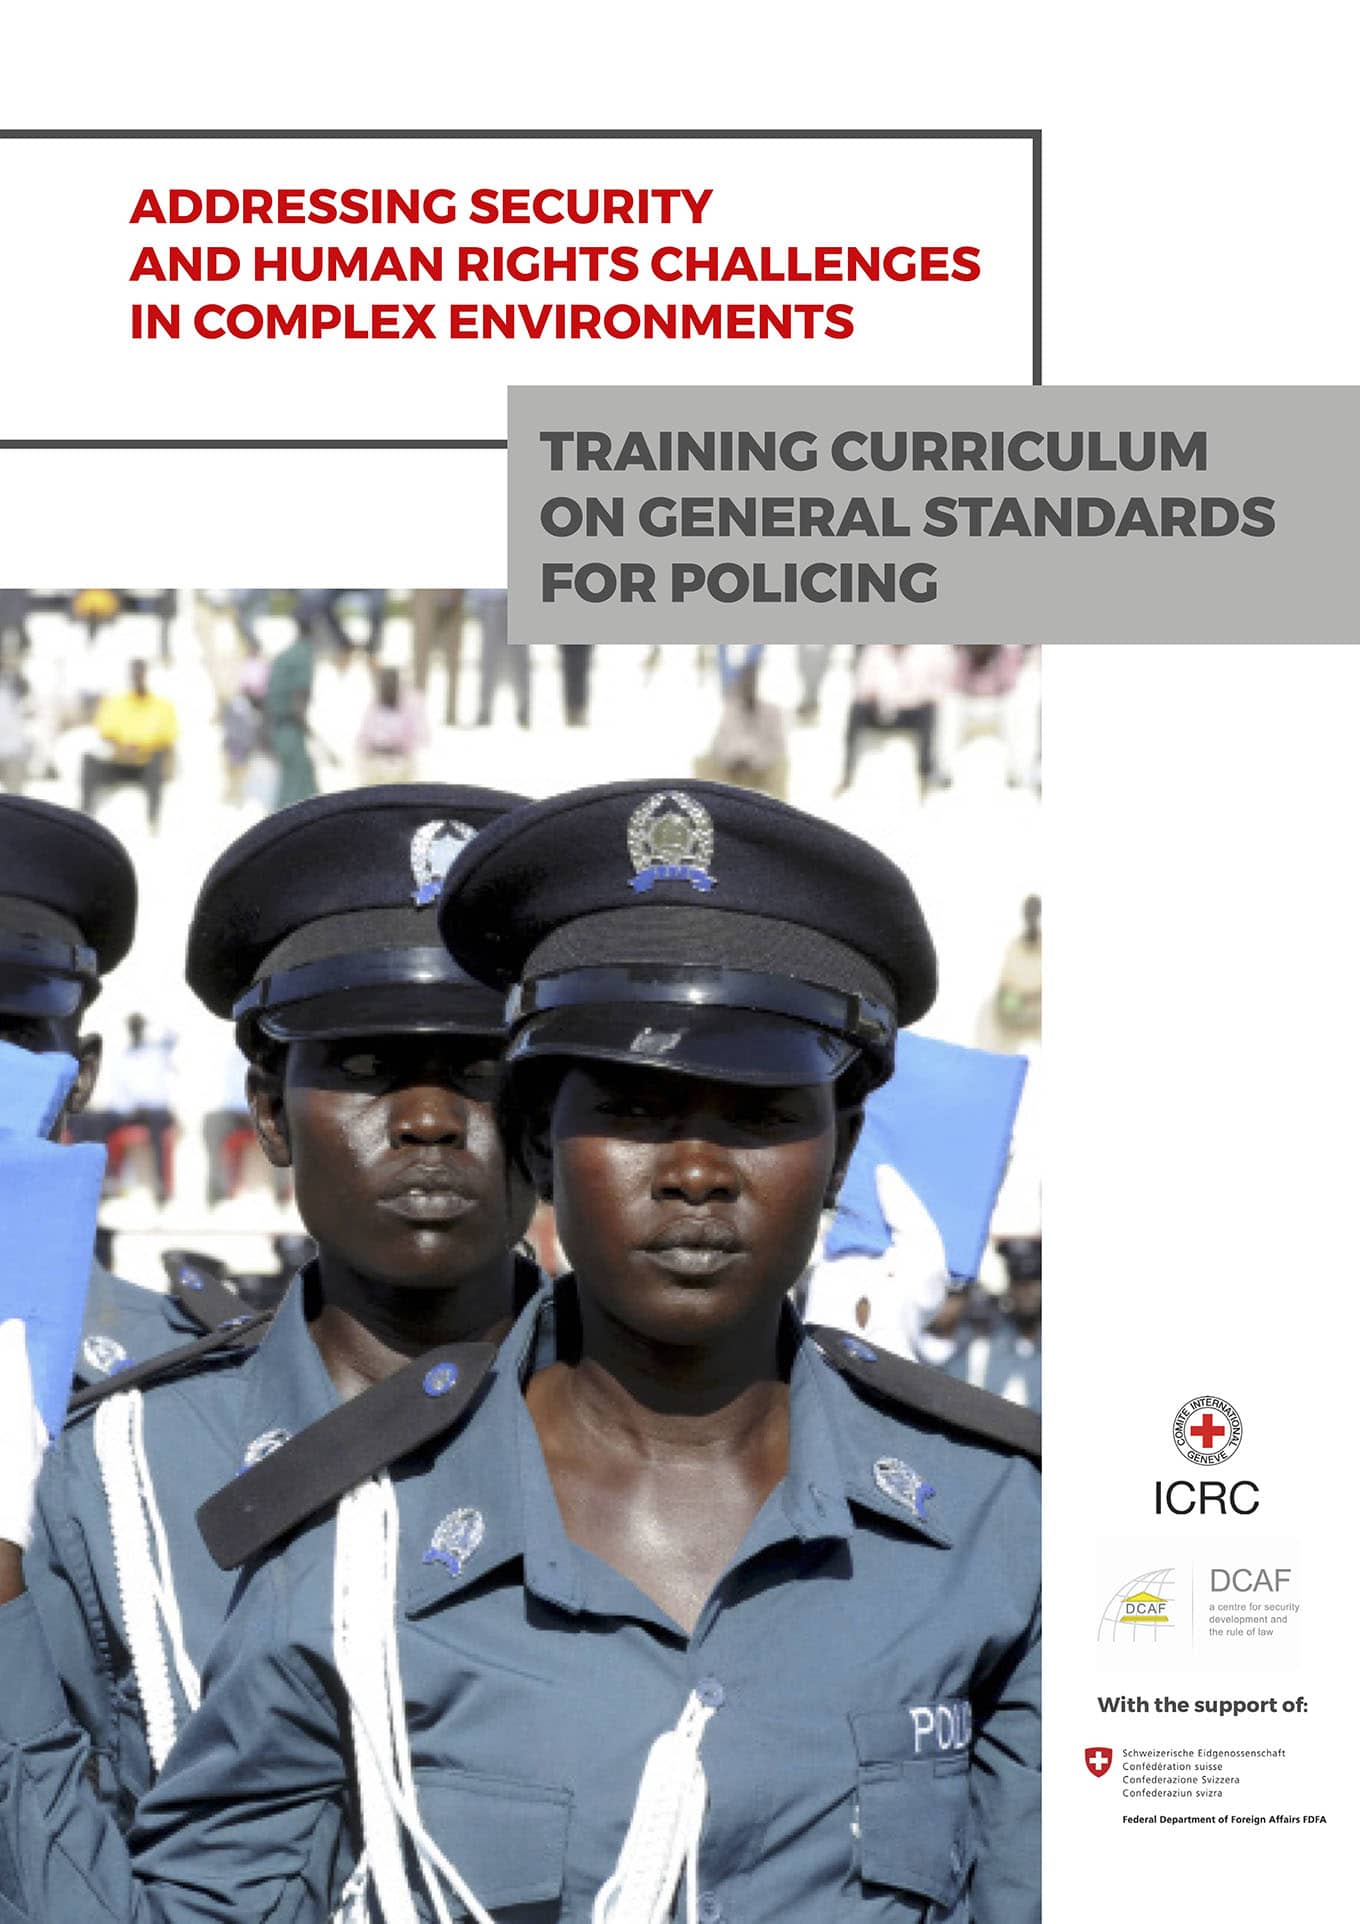 Training Curriculum on General Standards for Policing (DCAF and ICRC, September 2018)